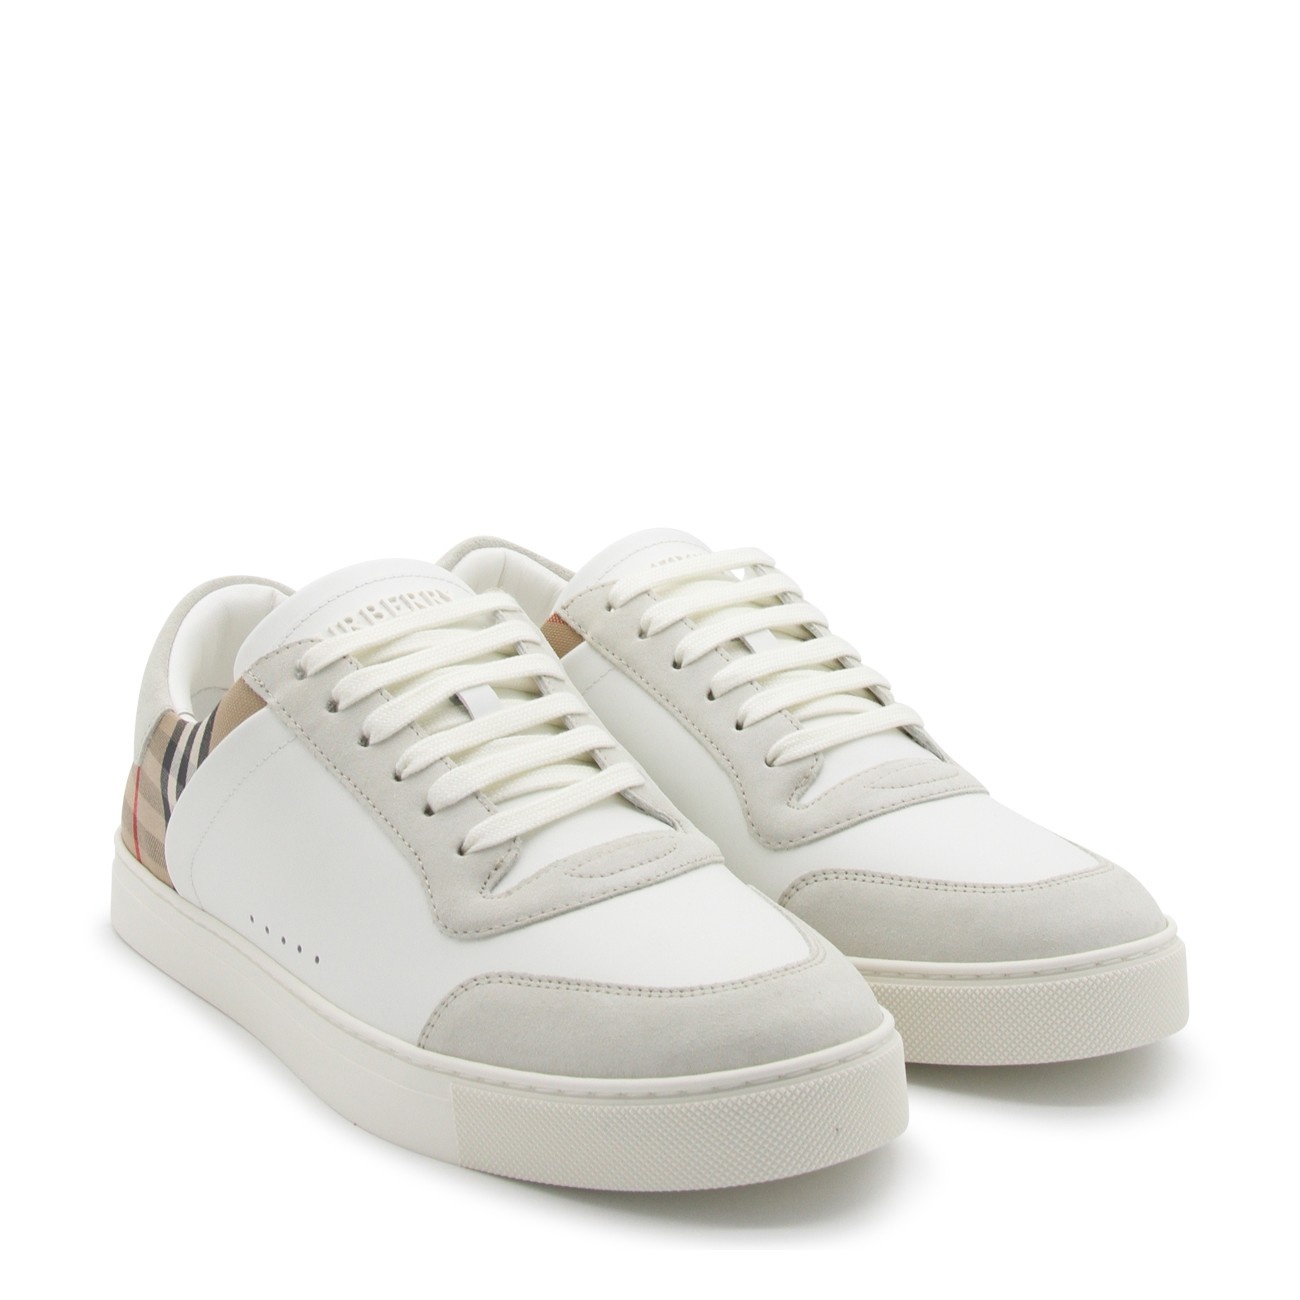 white and archive beige canvas and leather sneakers - 2